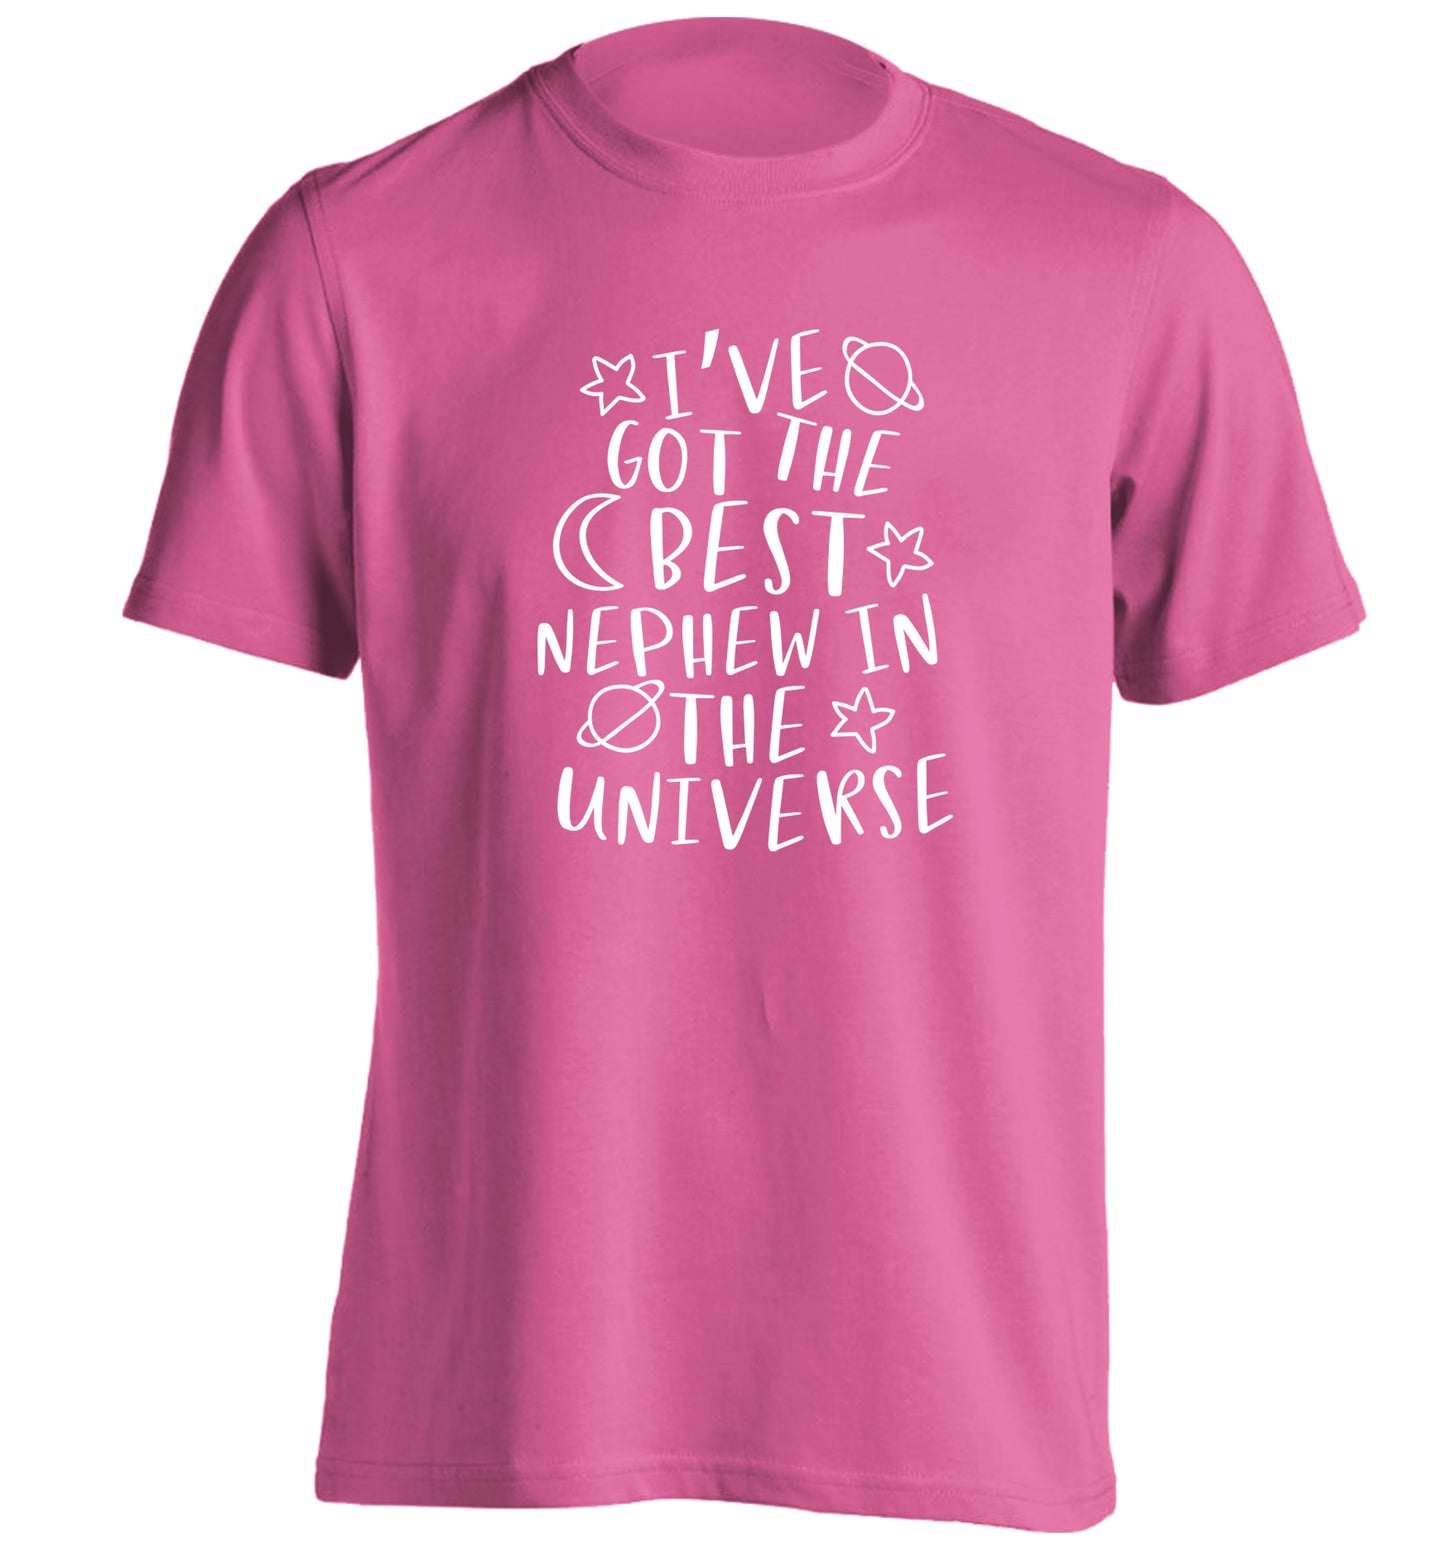 I've got the best nephew in the universe adults unisex pink Tshirt 2XL